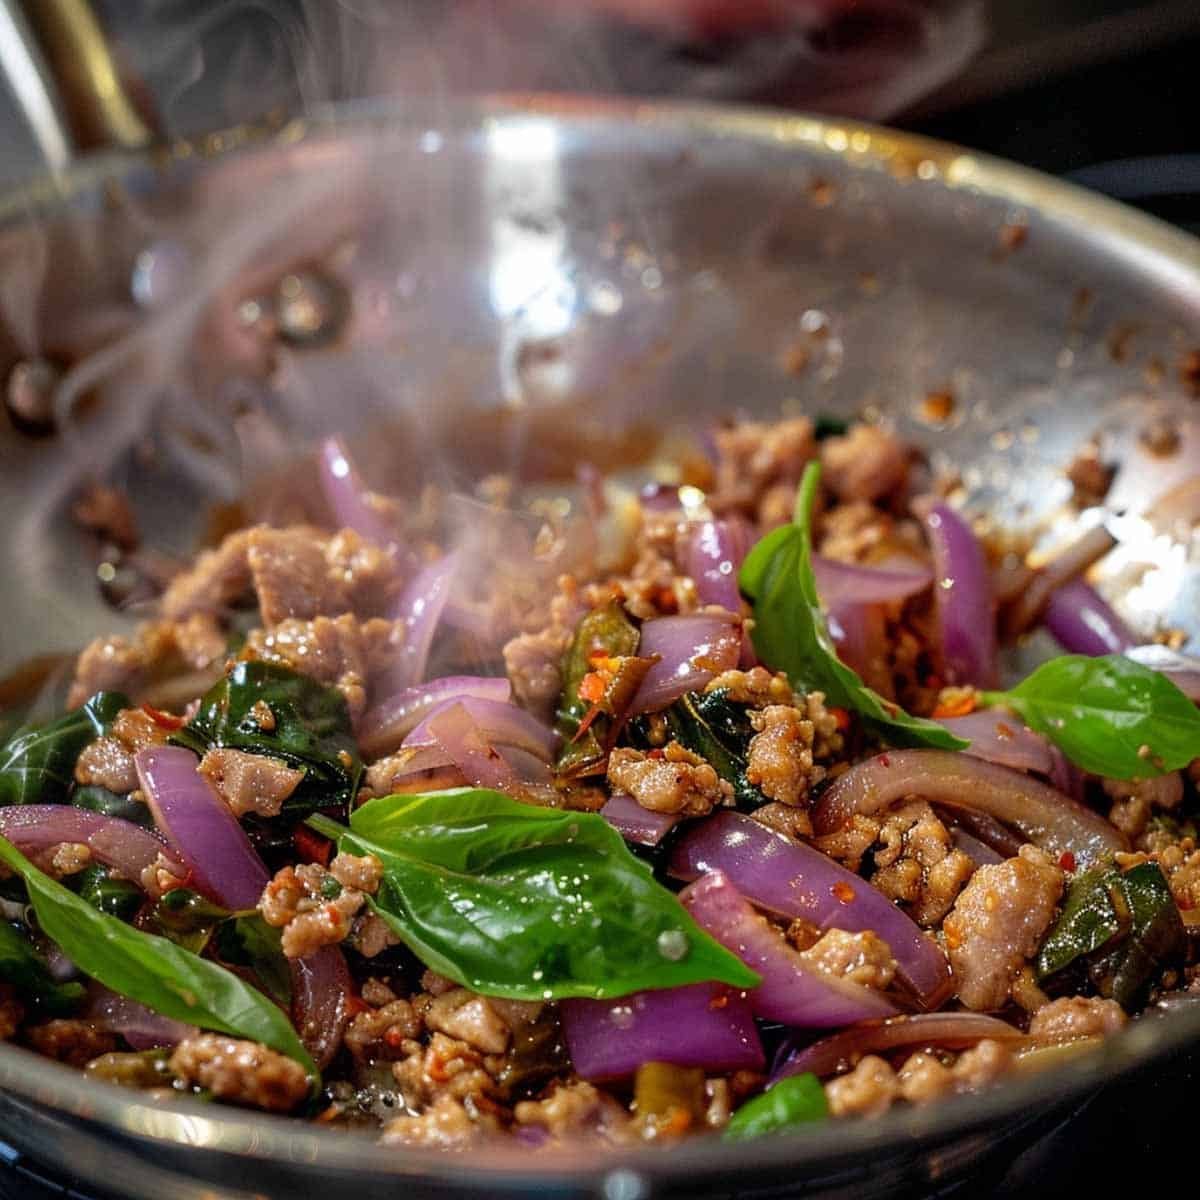 Adding basil leaves to cooked pork and onions for Thai Basil Pork recipe  (Pad Kra Pao Moo)